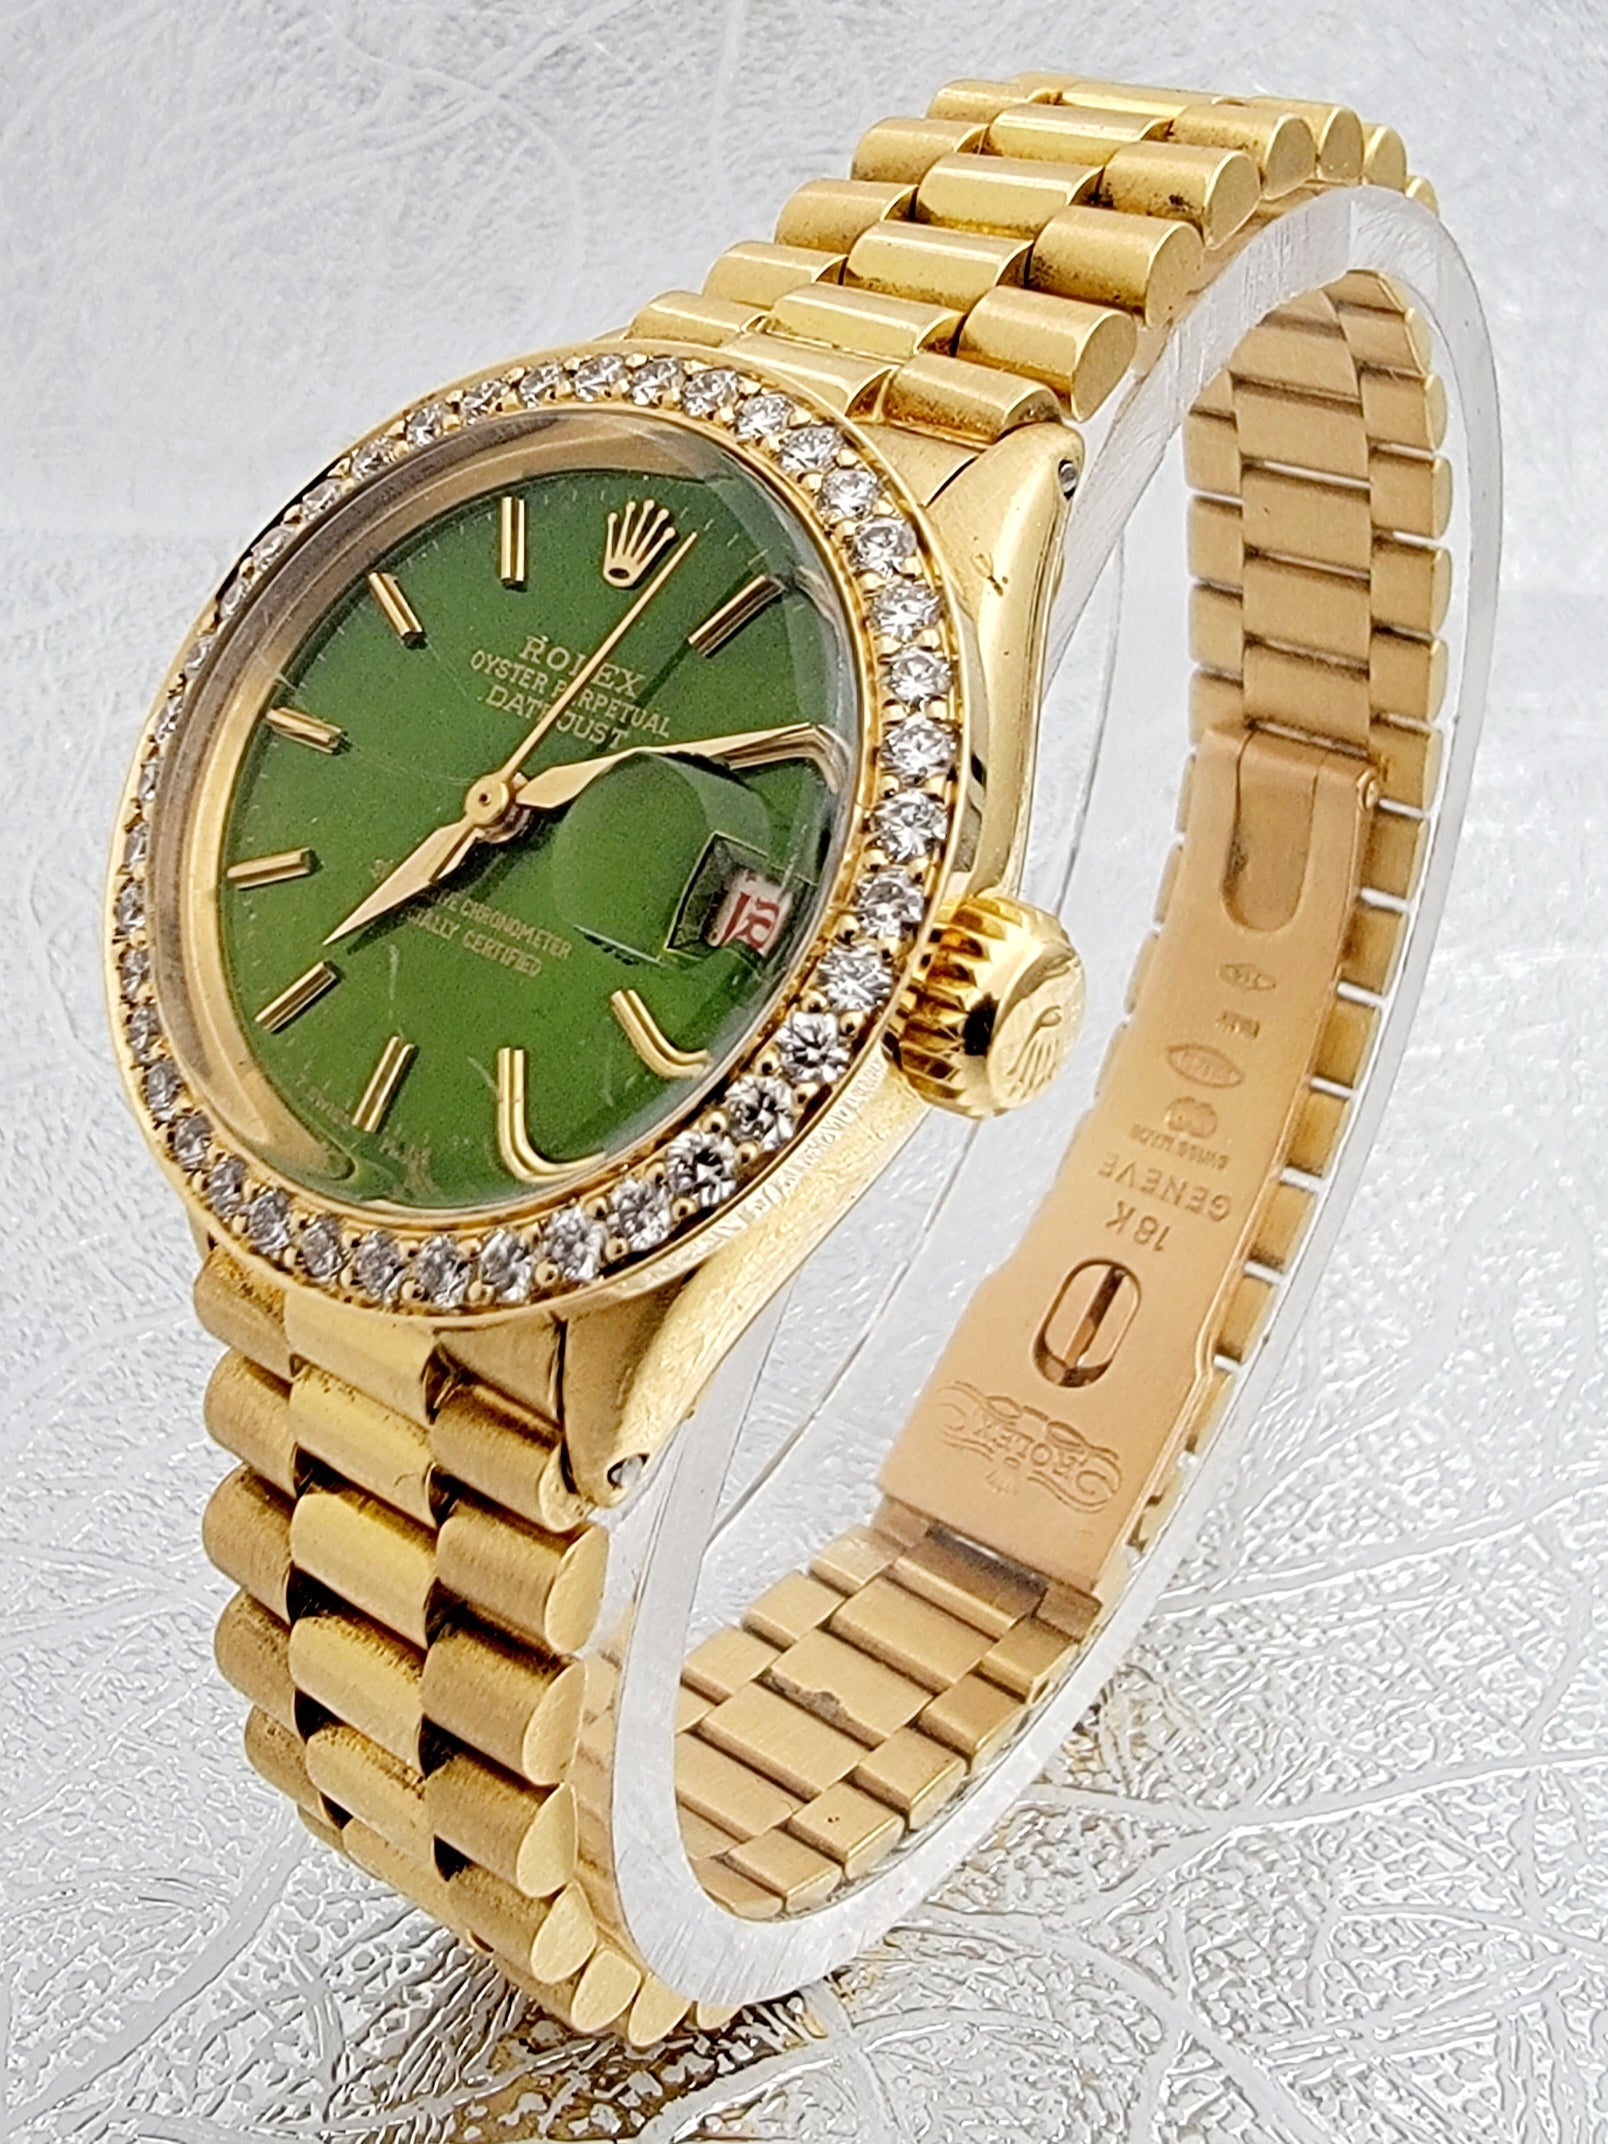 Ladies Rolex 26mm Presidential 18K Solid Yellow Gold Watch with Green Dial and Diamond Bezel. (Pre-Owned 6517)